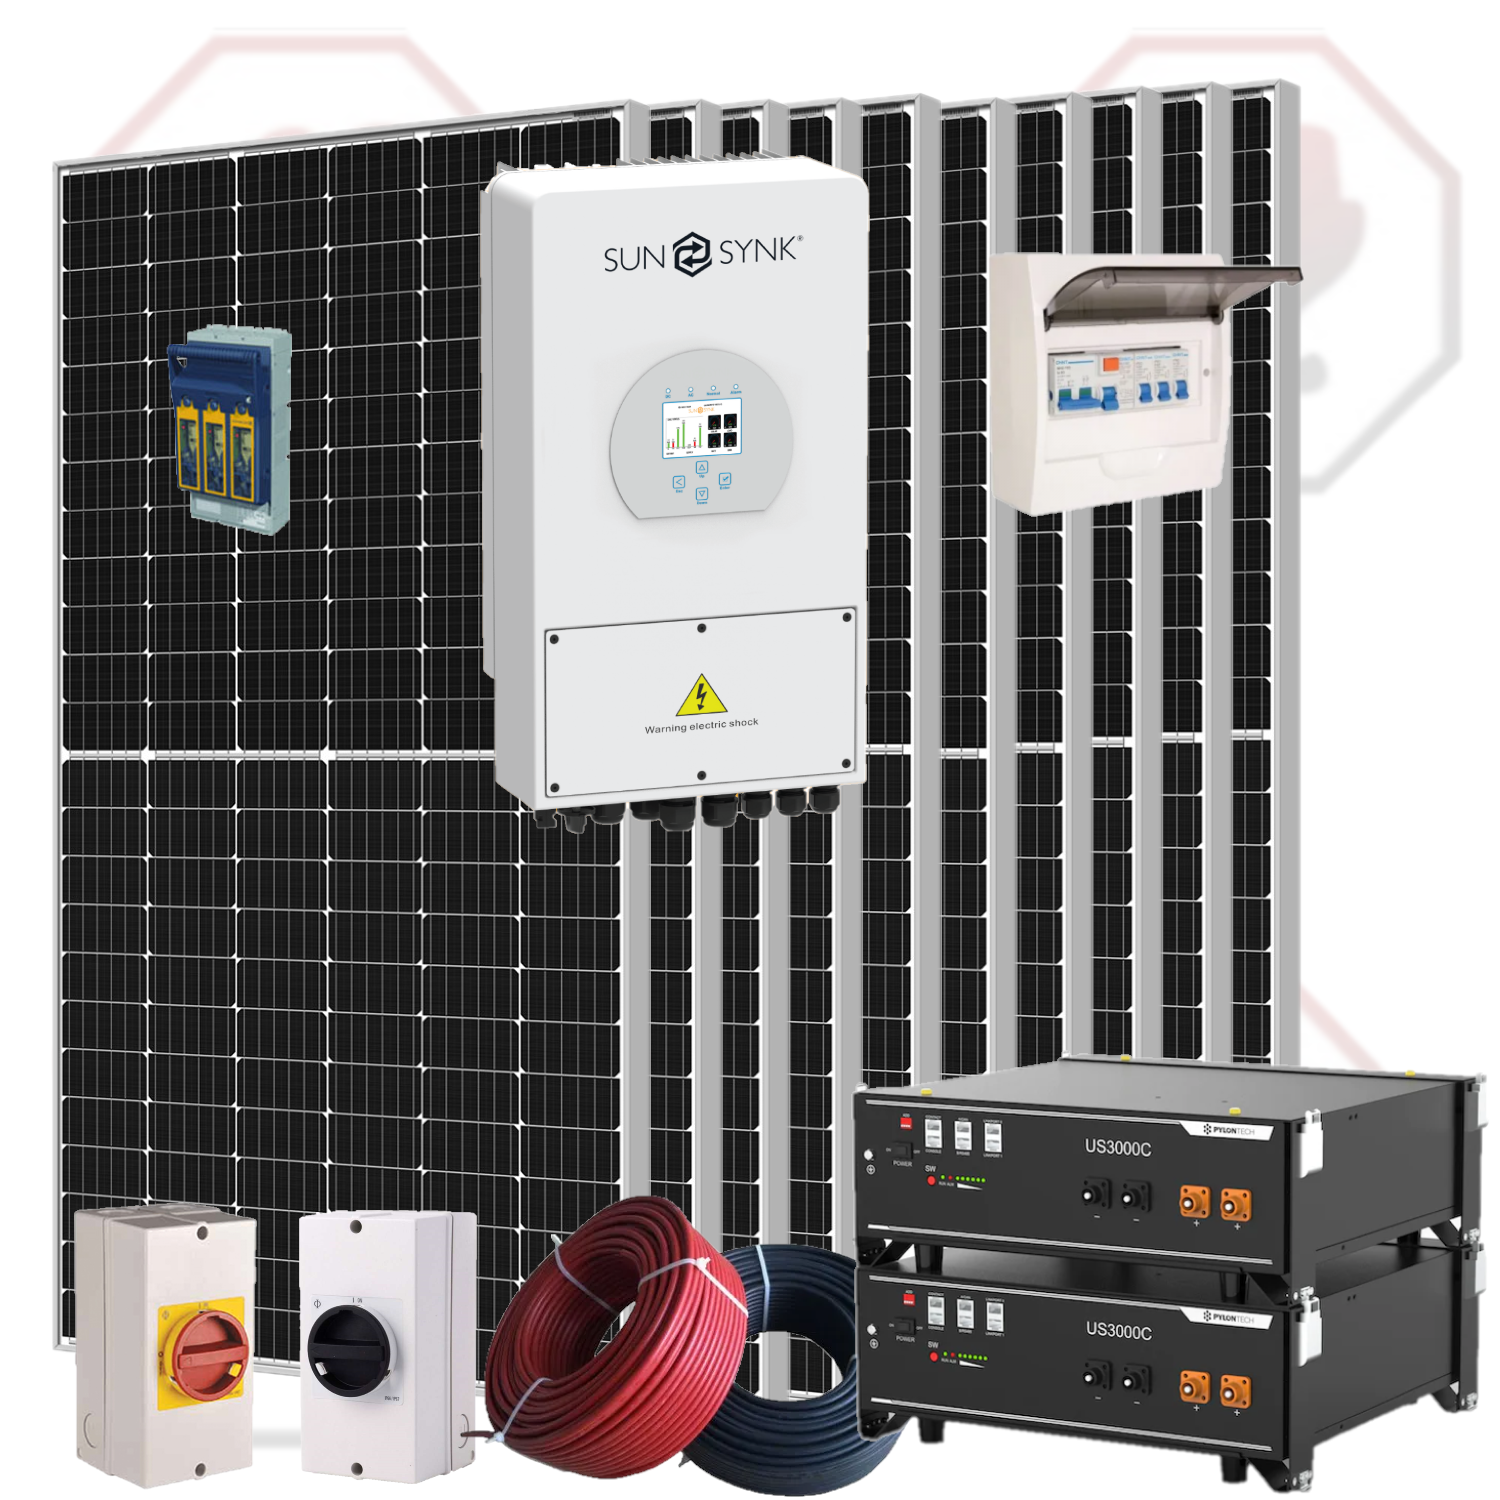 Sunsynk 5kw Rooftop Solar Power Kit